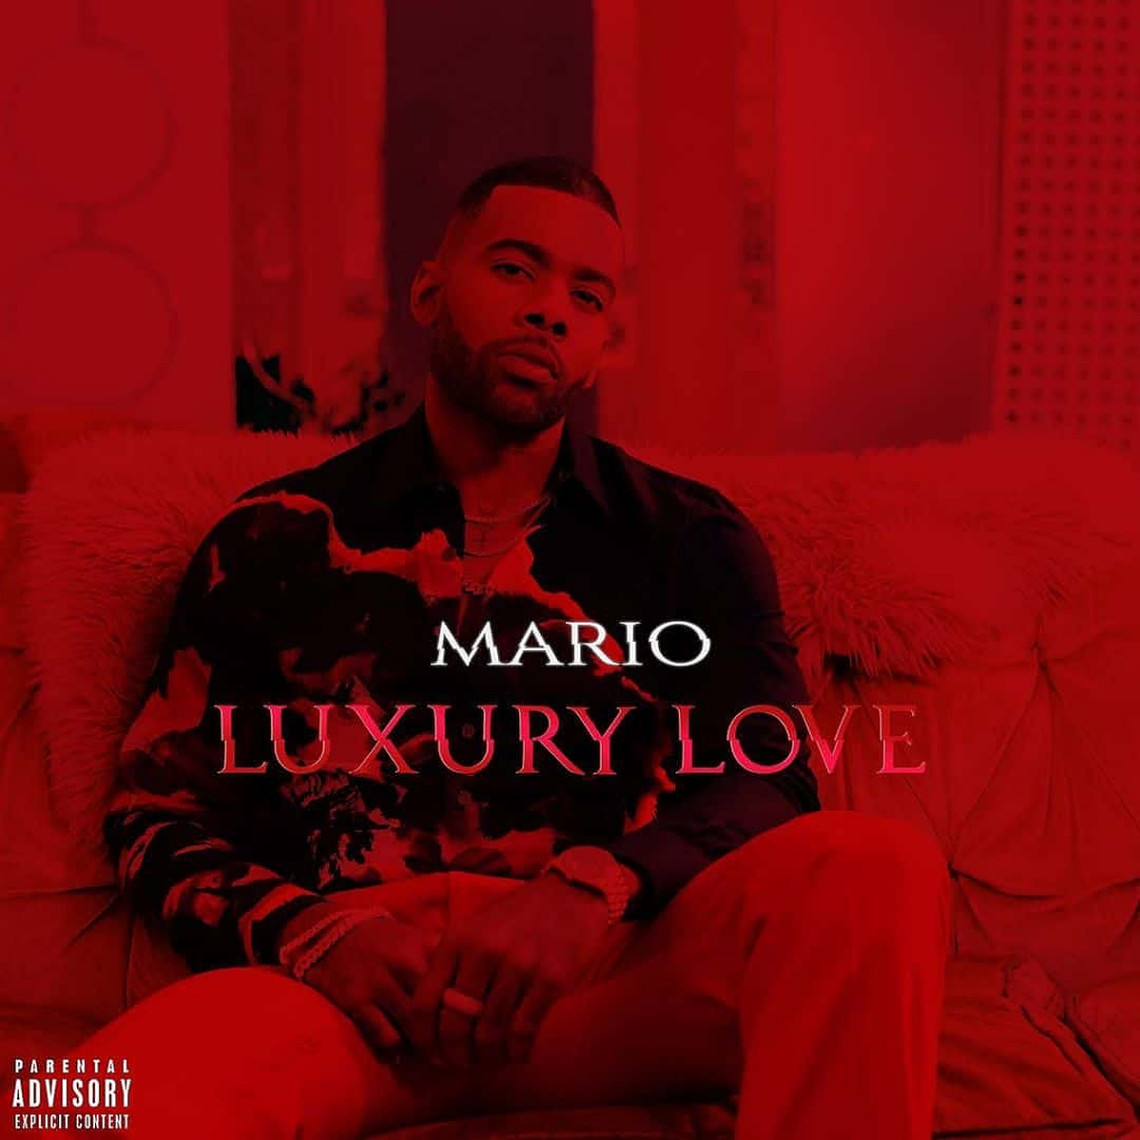 Mario Comes Through With A Valentine’s Day Jam On “Luxury Love”